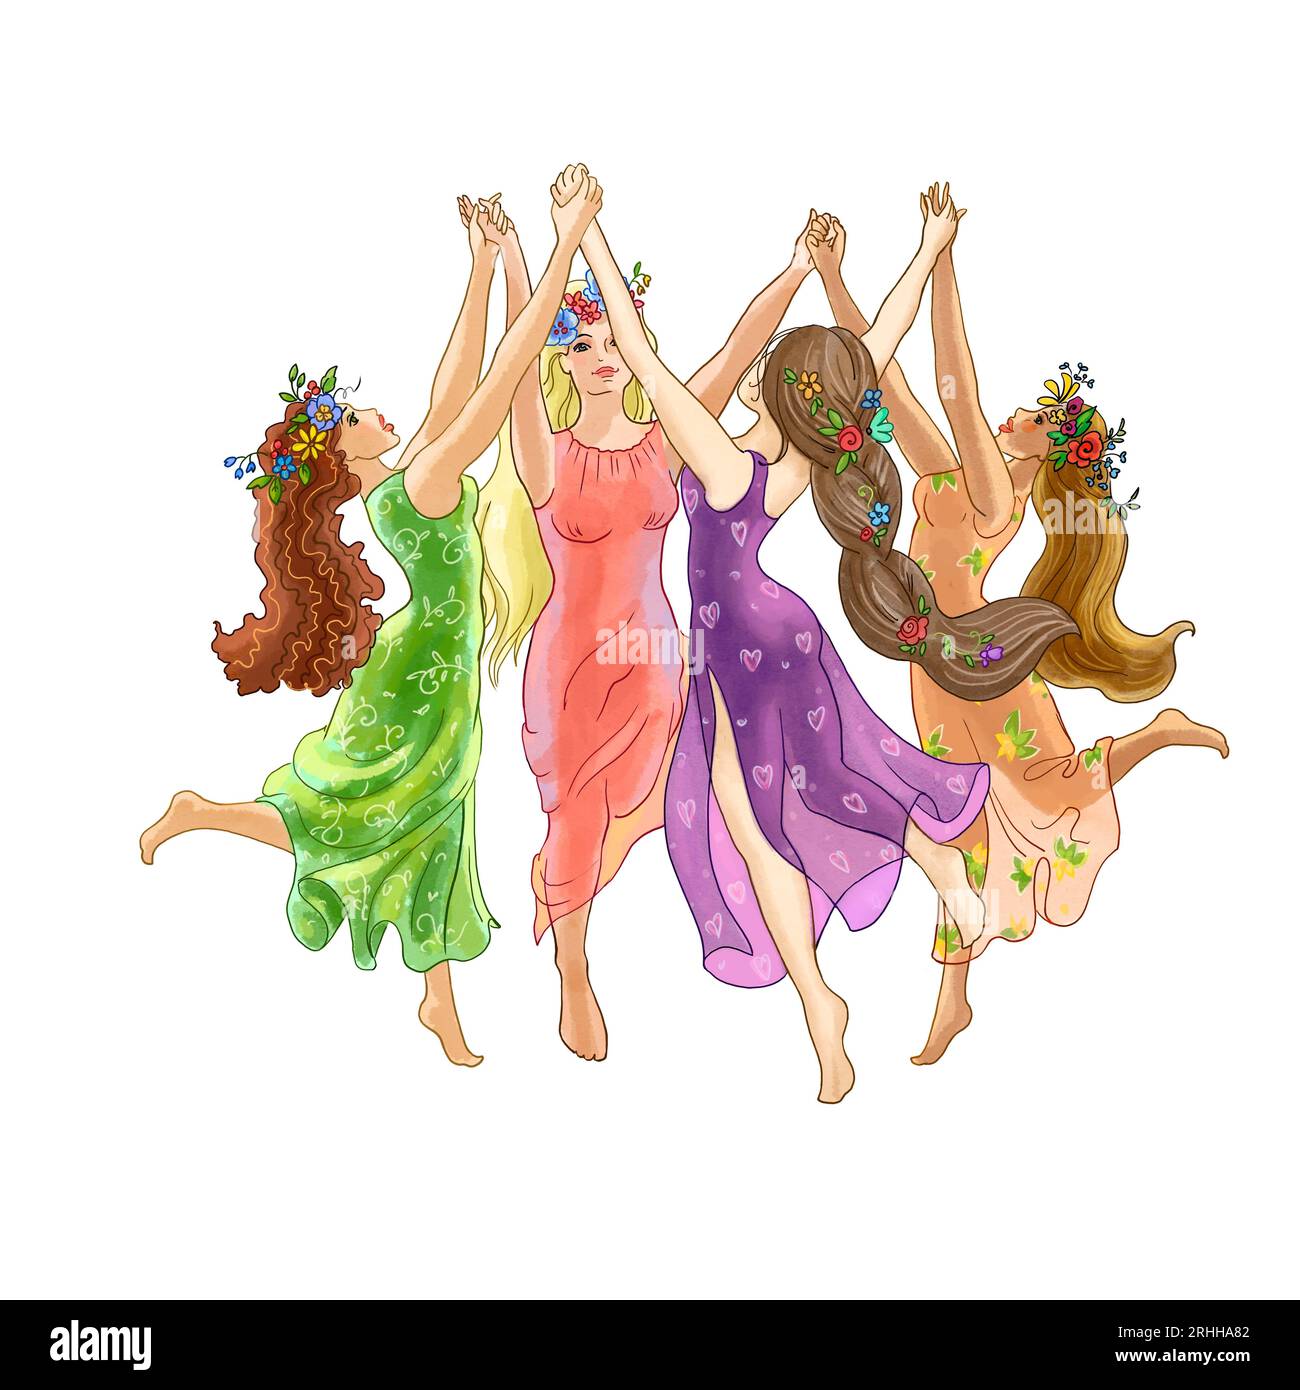 Young girls dance holding hands in a circle. Joyful emotions and expression of happiness. Women's friendship, sisterhood and mutual support in the women's circle. For emblems, logos, printing, etc. High quality illustration Stock Photo